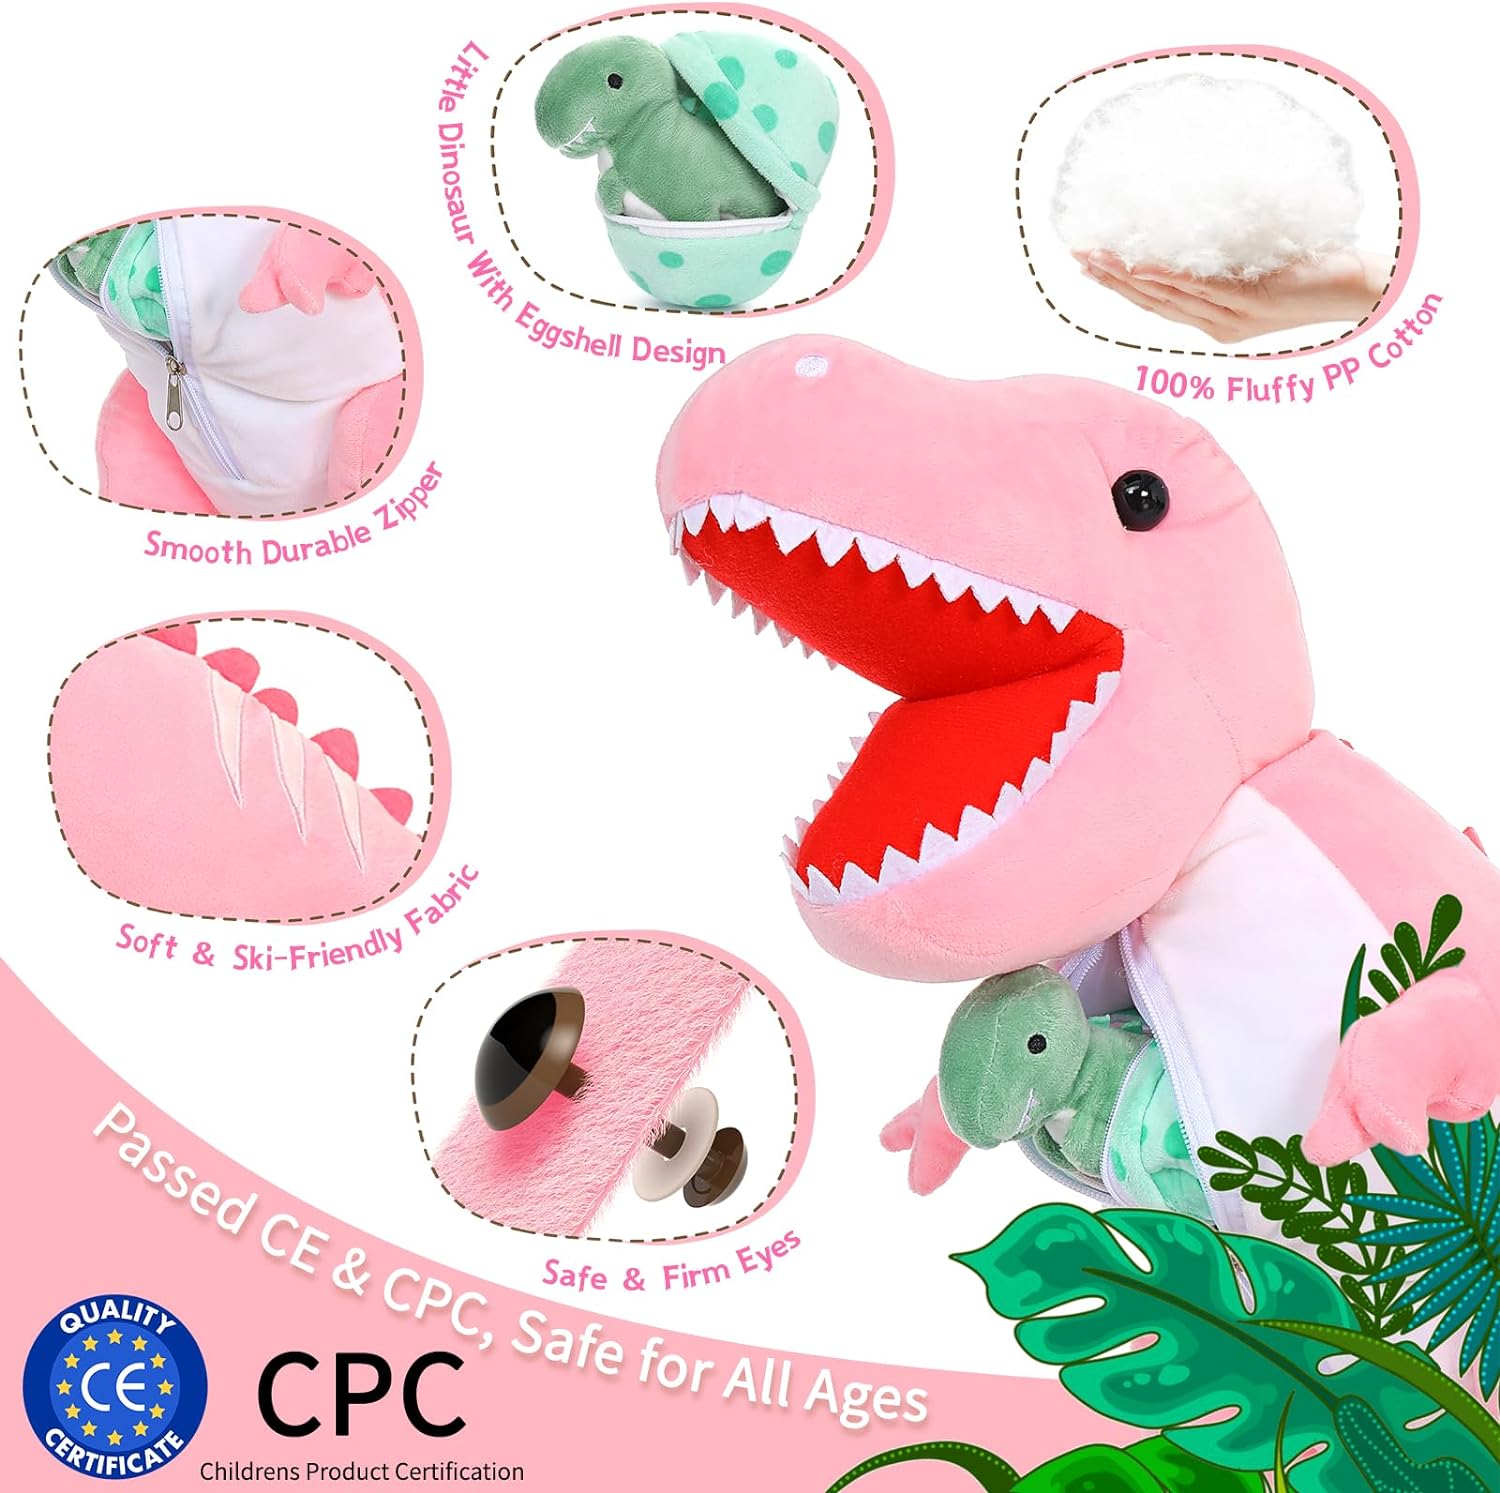 Dinosaur Stuffed Toy with 3 Baby Dinosaurs, Green/Pink, 23.6 Inches